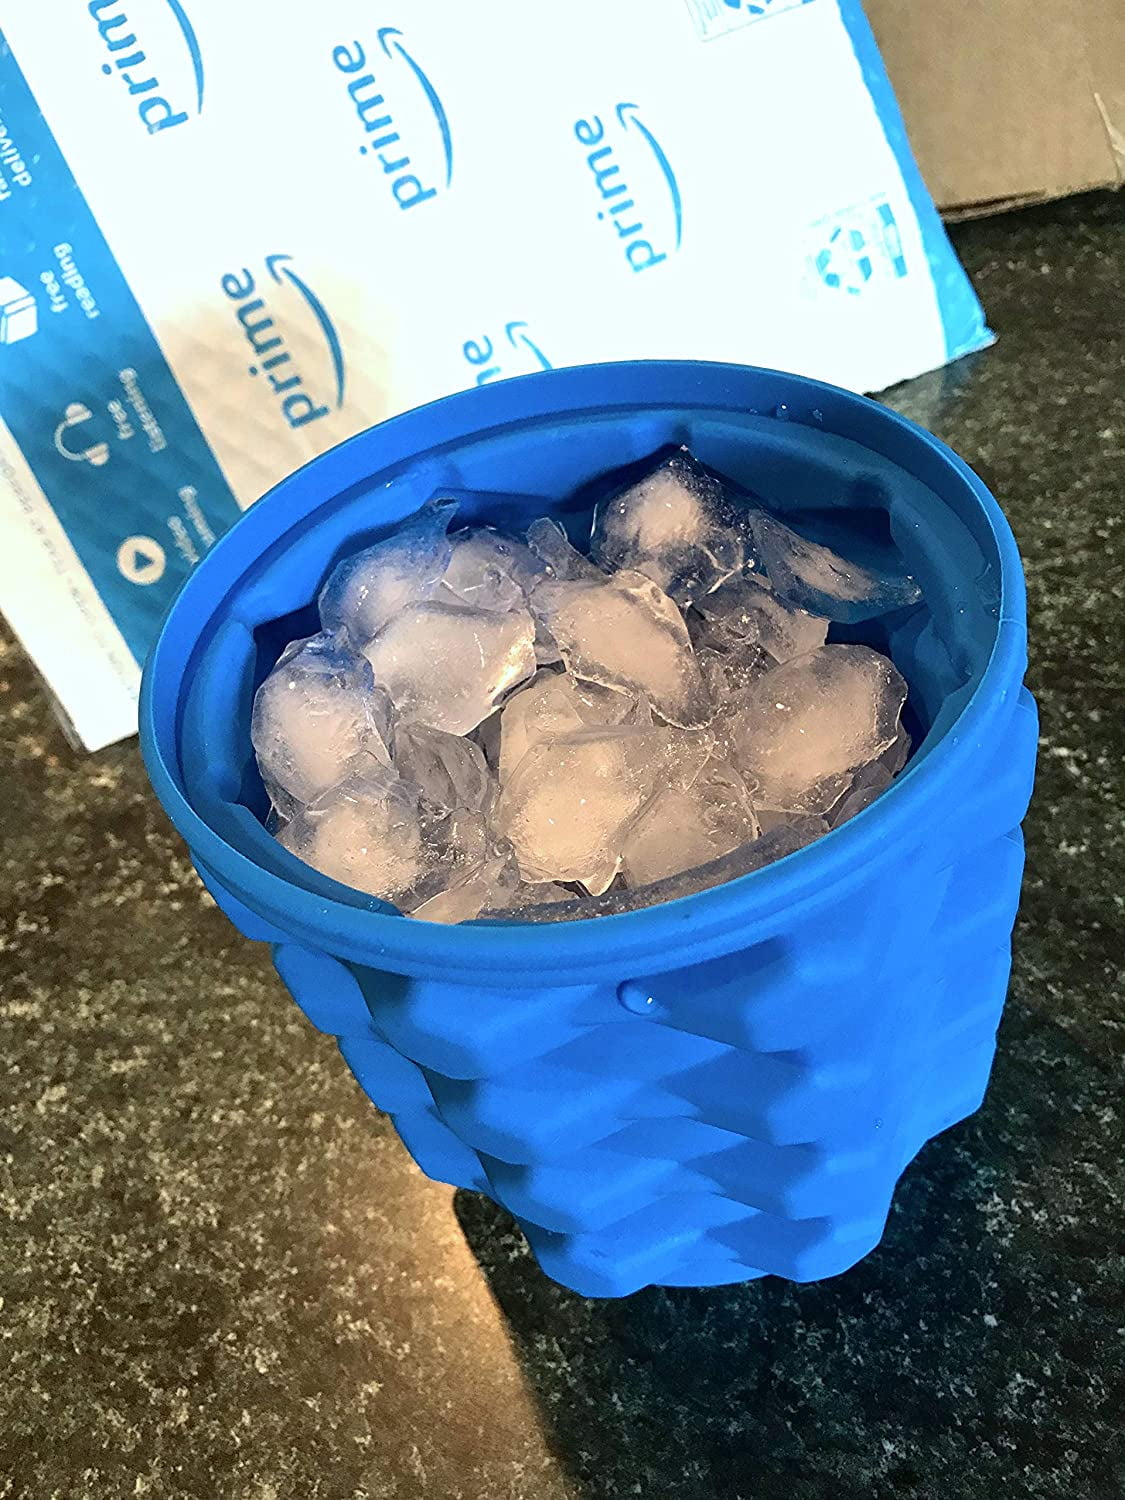 HUANGDOU The Ultimate Ice Cube Maker Silicone Bucket with Lid Makes Small Size Nugget Ice Chips for Soft Drinks, Cocktail Ice, Wine on Ice, Crushed Ice Maker